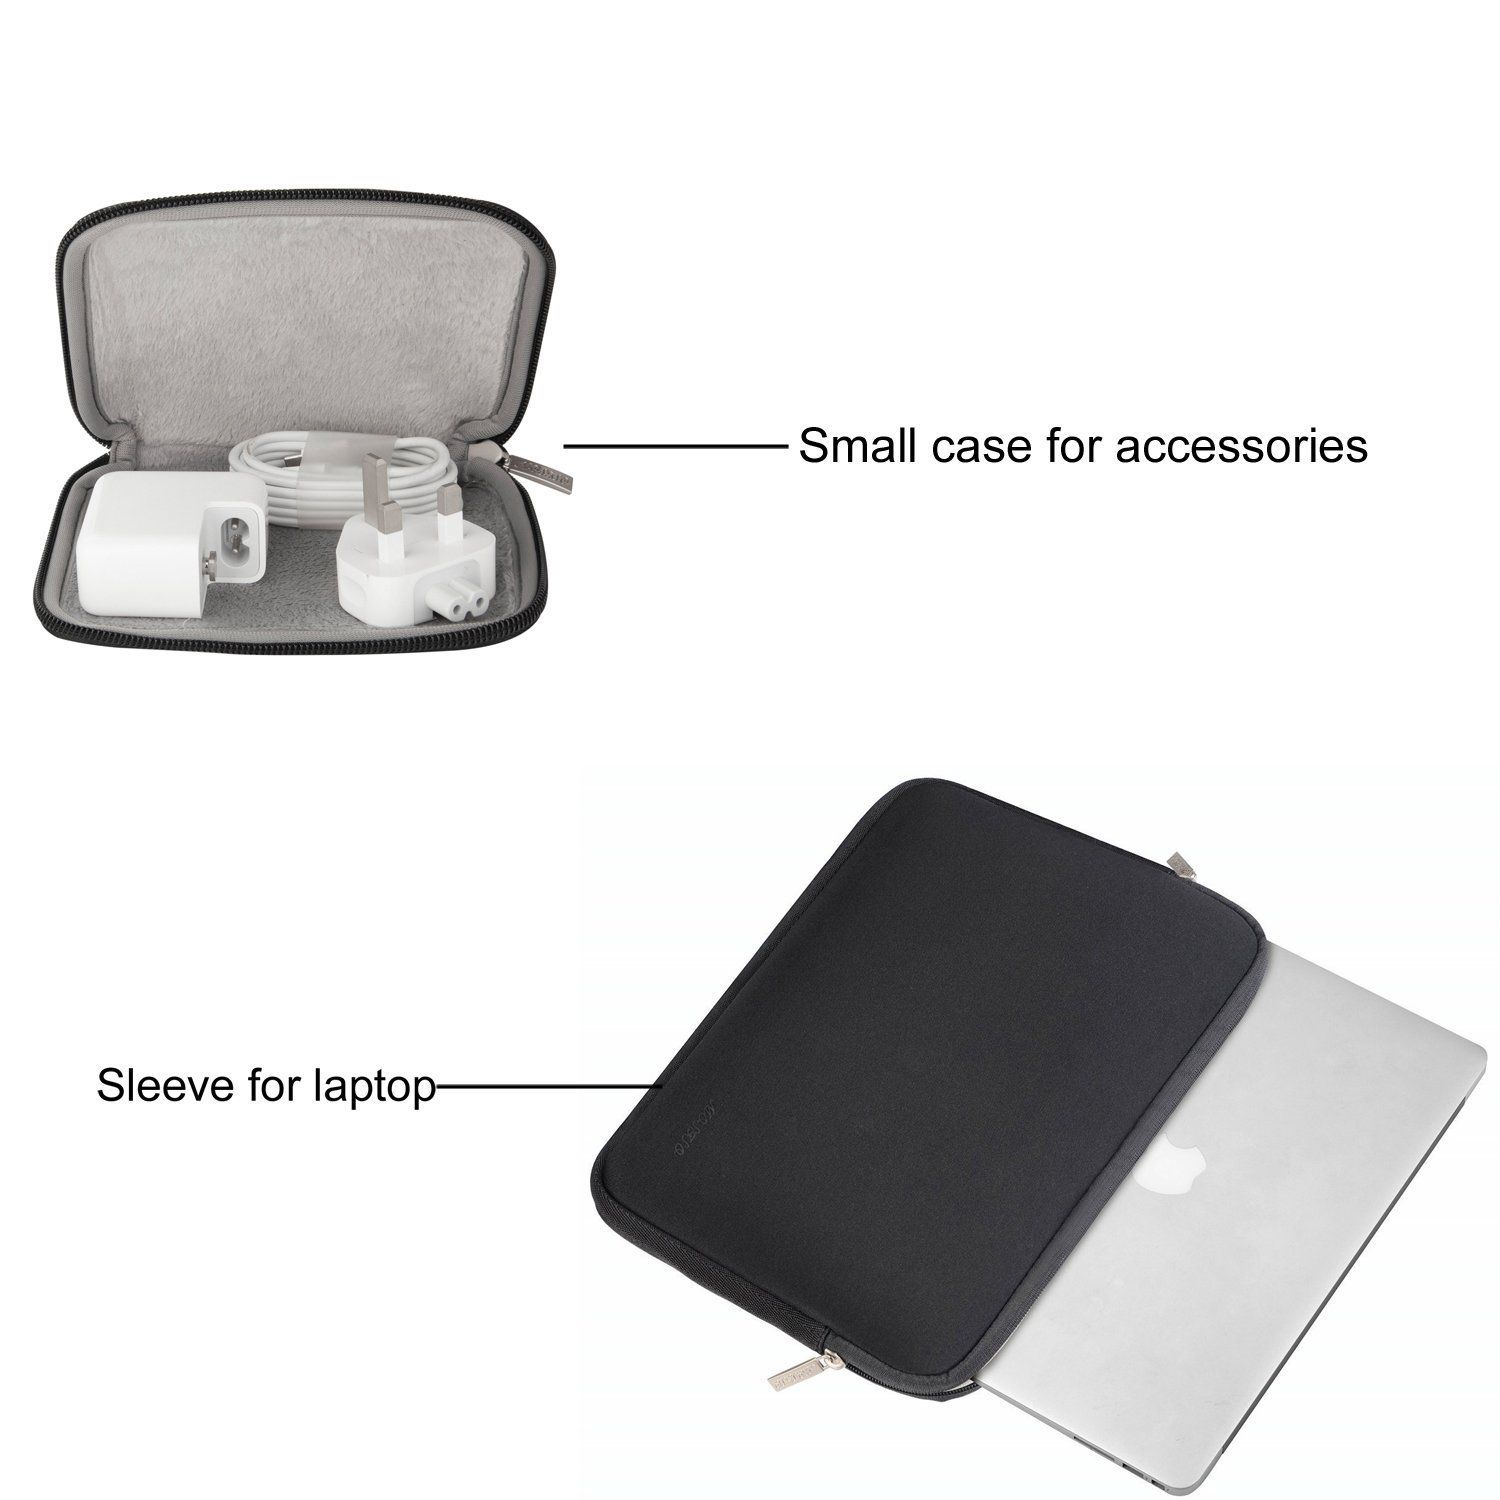 13-133-inch-Waterproof-Laptop-Case-Bag-With-Charger-Bag-for-Xiaomi-Air-notebook-Macbook-Air-Pro-1238076